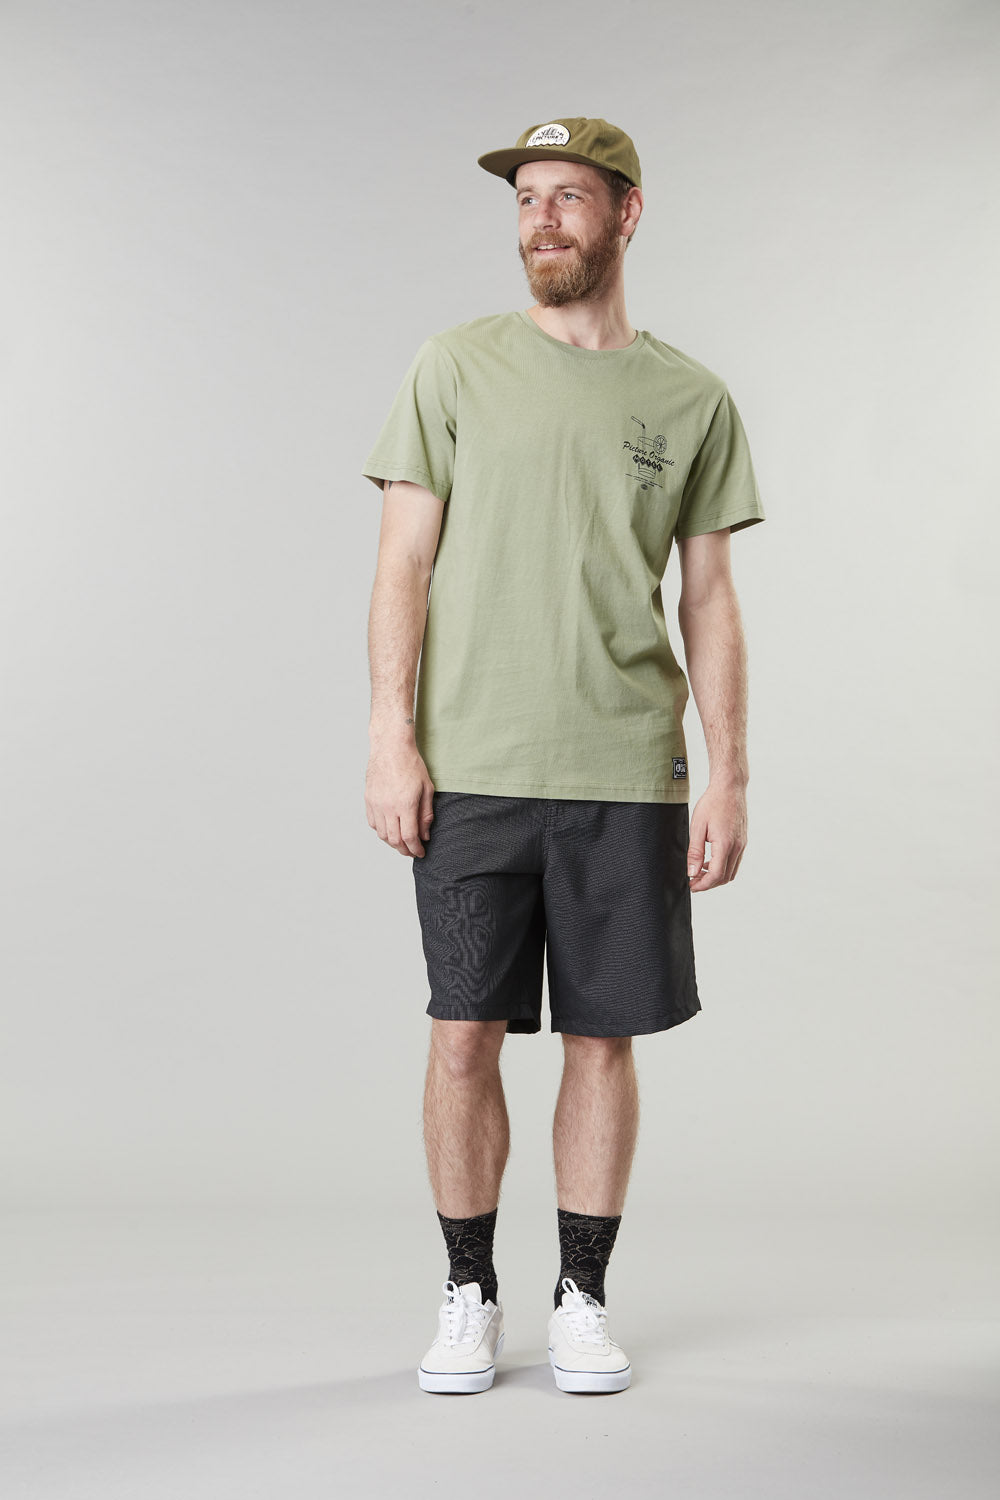 Picture Organic - M's Noas Shorts - Recycled Polyester - Weekendbee - sustainable sportswear